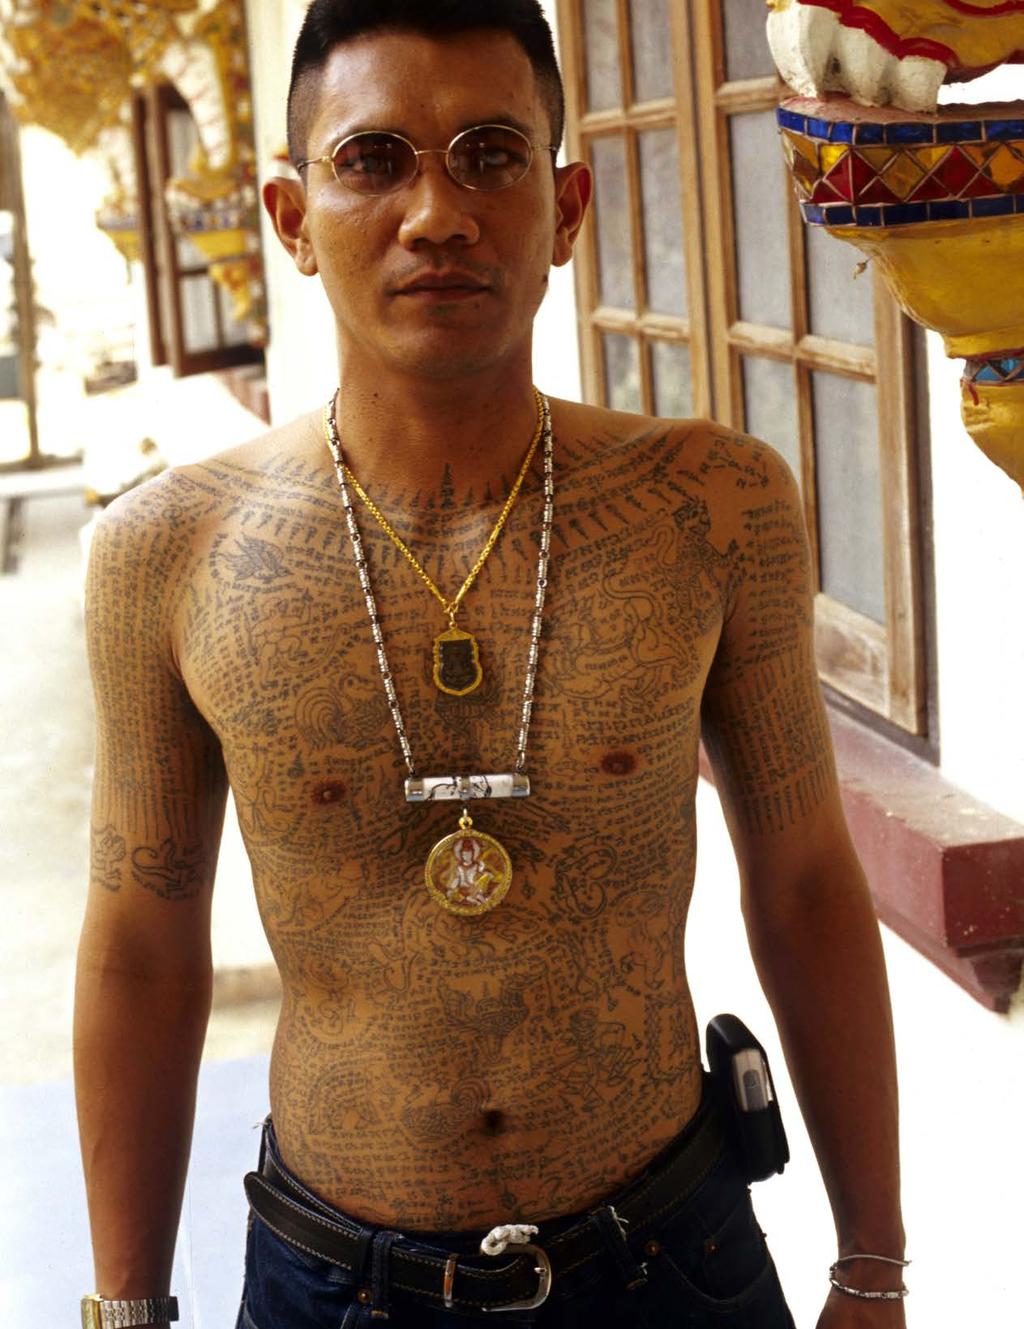 Heavily tattooed disciple visiting Wat Bang Phra monastery. His amulets provide another layer of bodily protection.